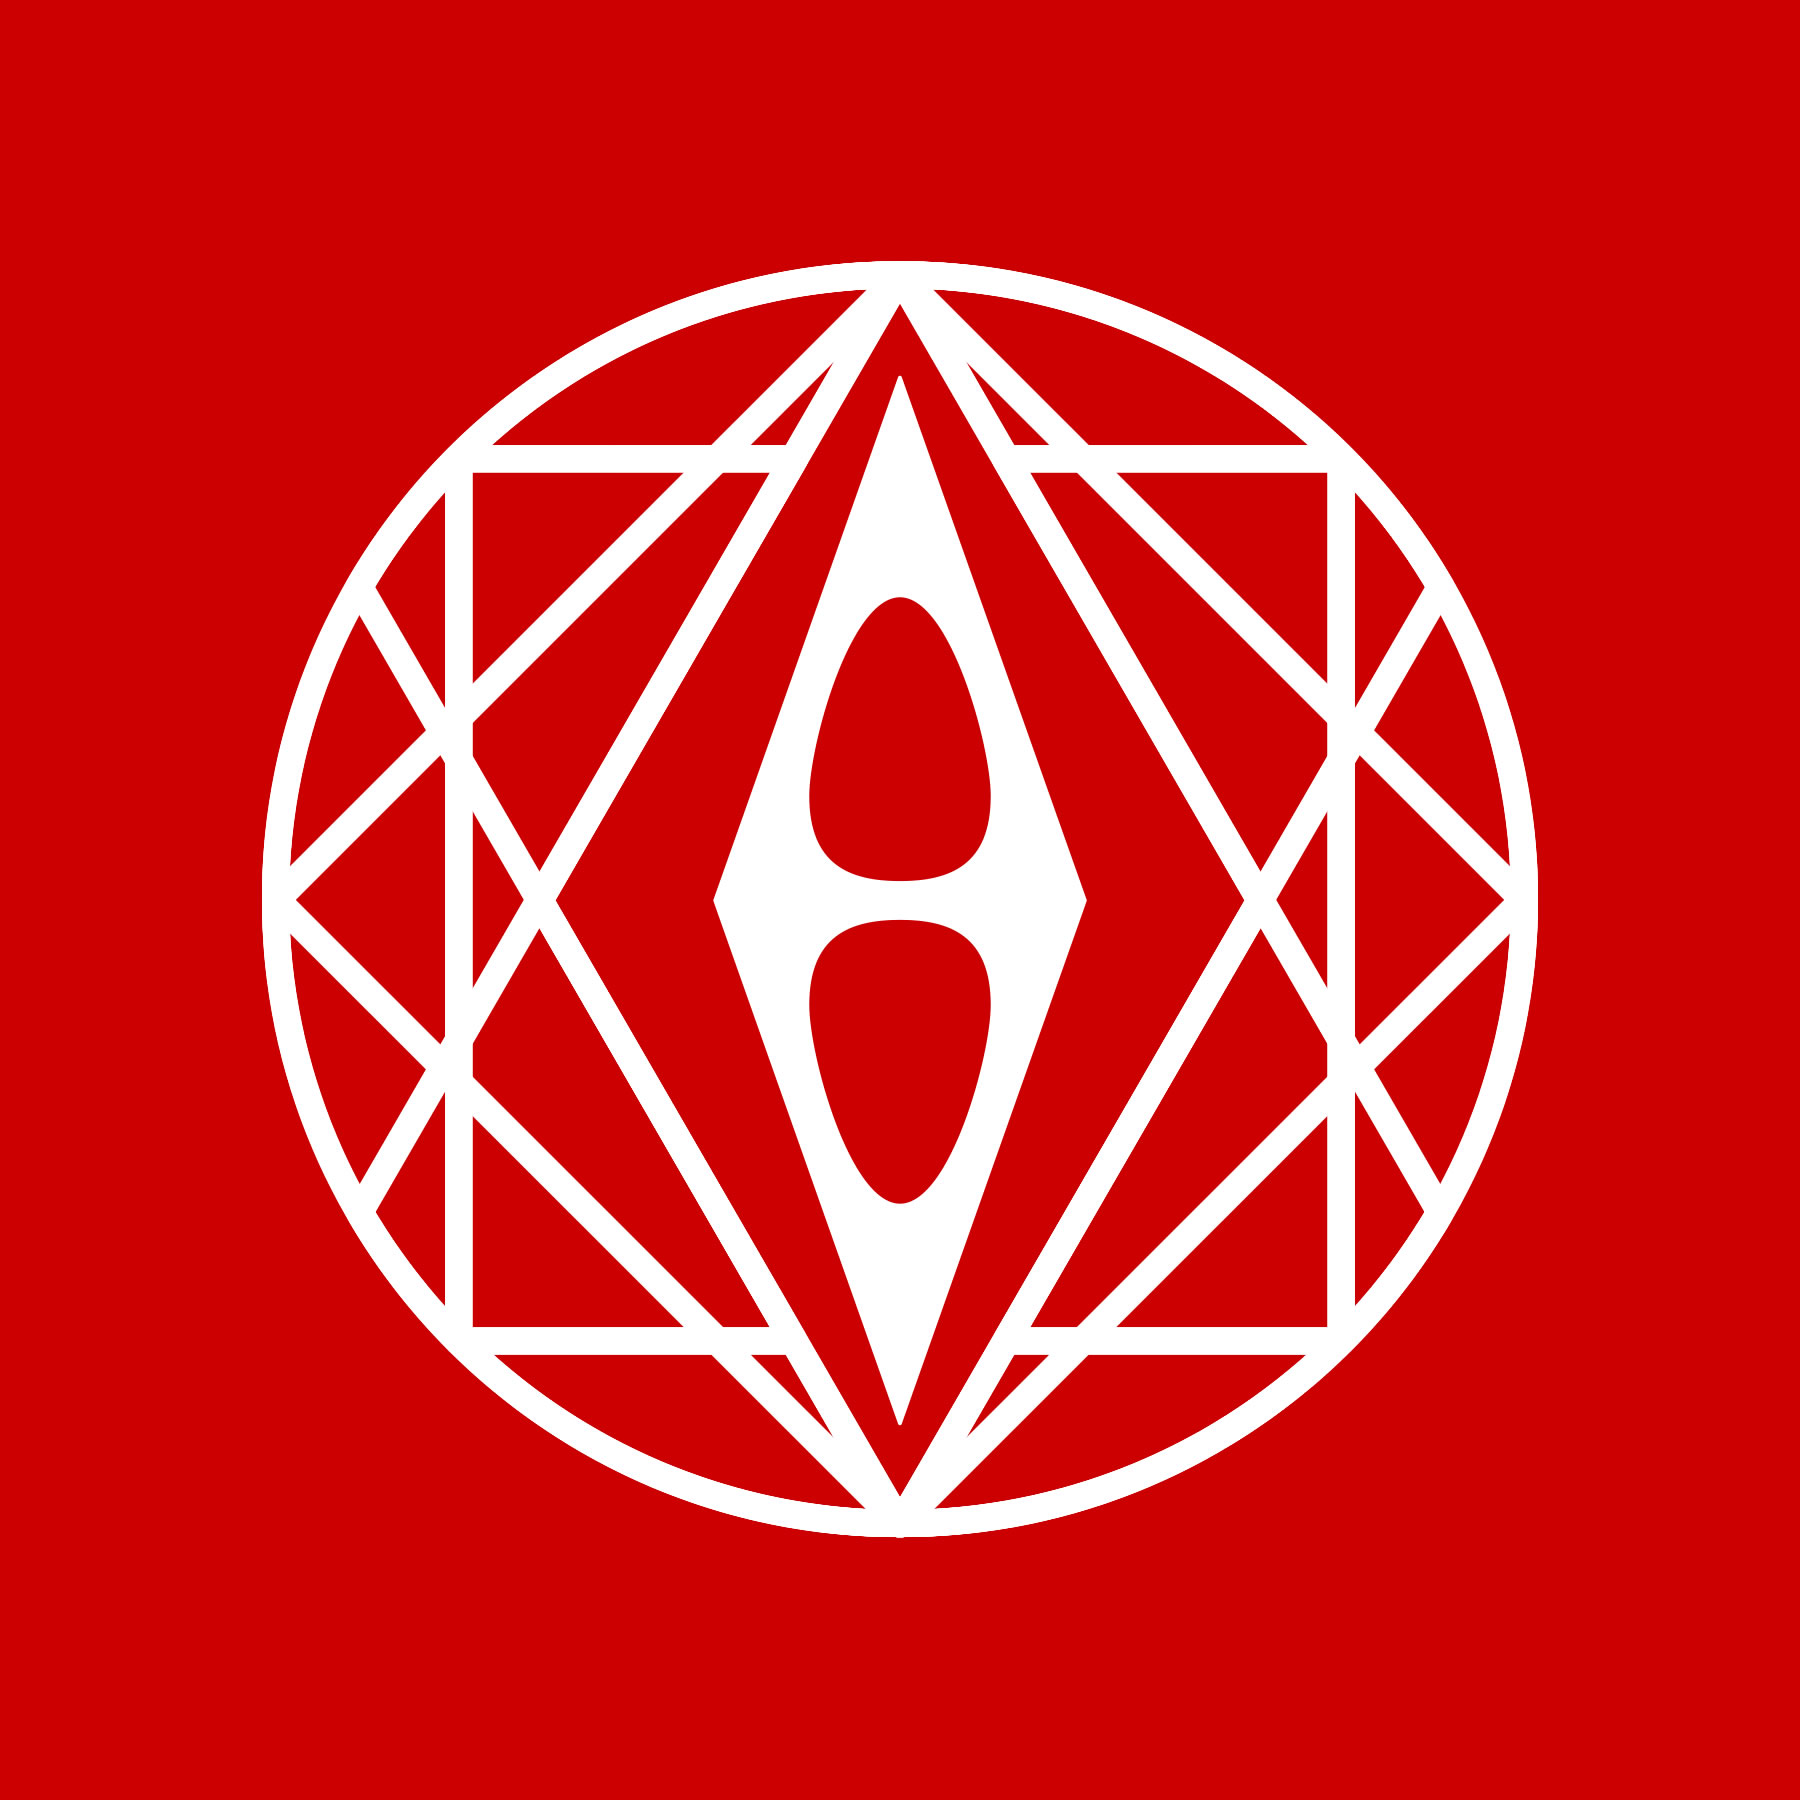 logo of the Secret Society of Design on red background